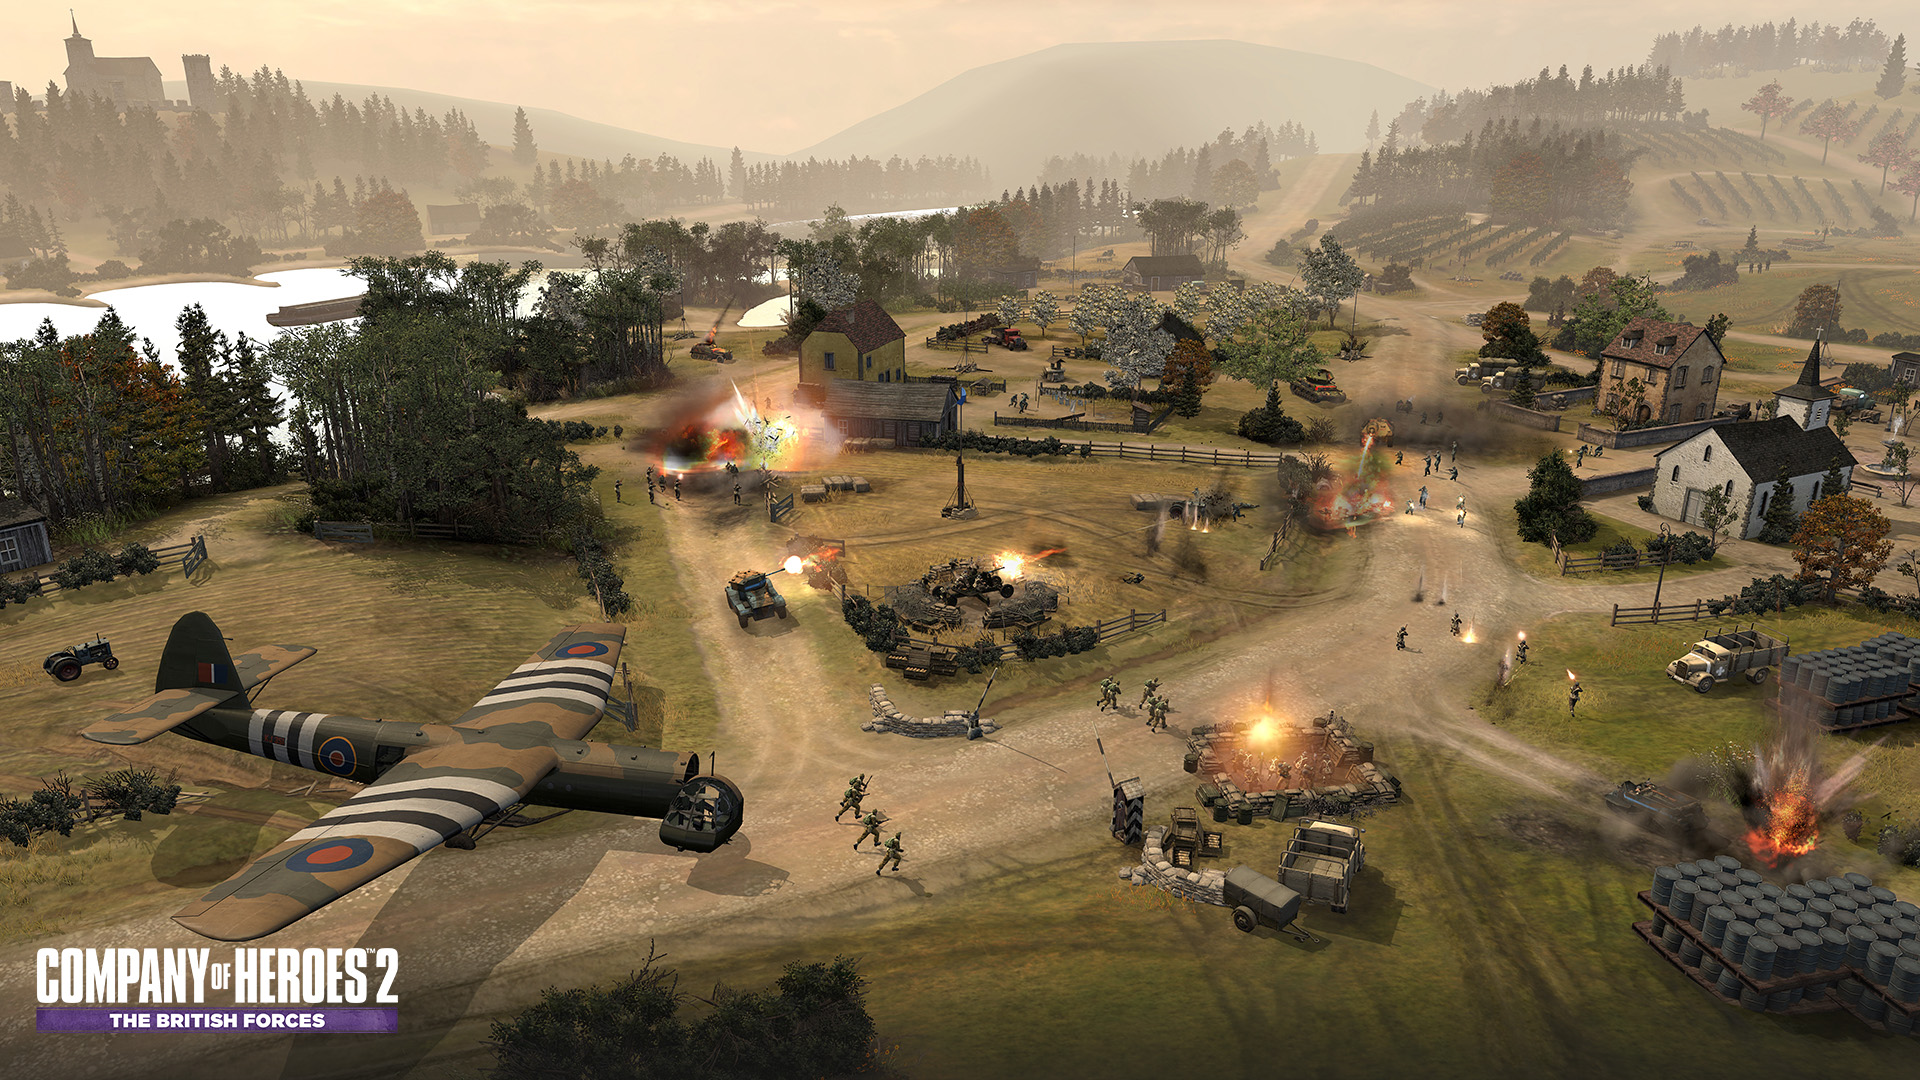 Company of Heroes 2 - The British Forces Price history · SteamDB